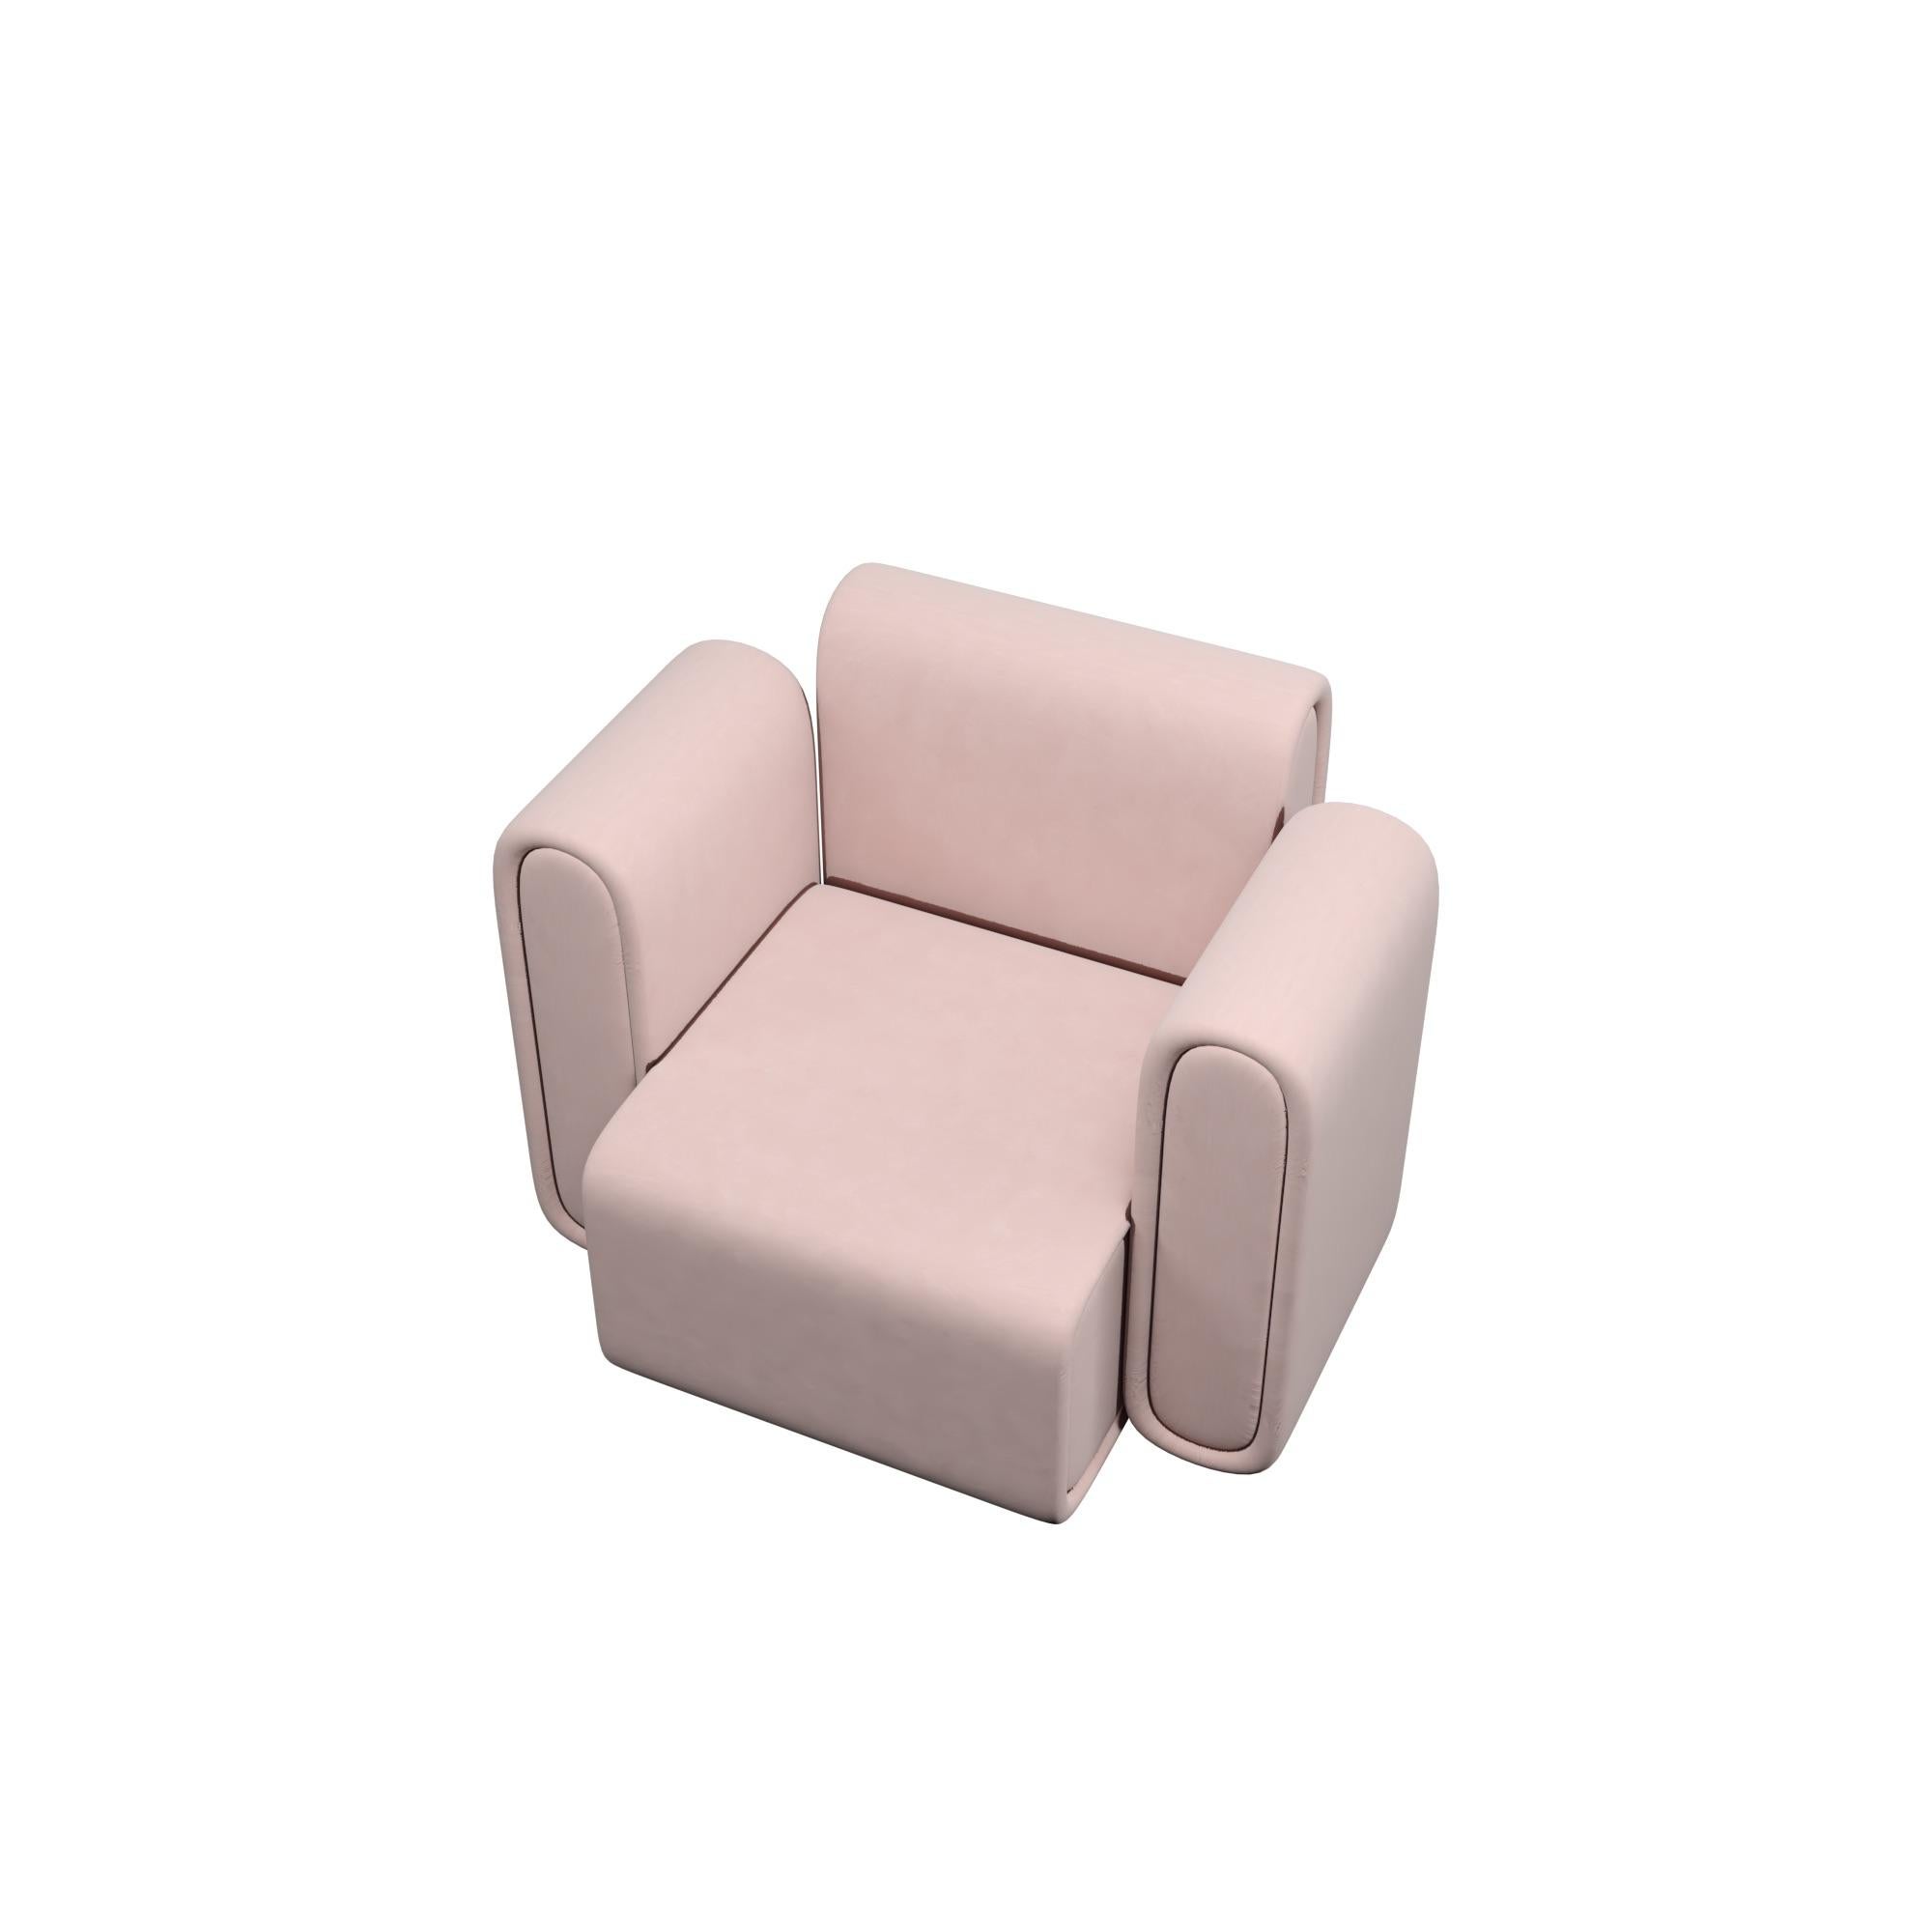 Moroccan HONG KONG Velvet Chair in Pink by Alexandre Ligios, REP by Tuleste Factory For Sale